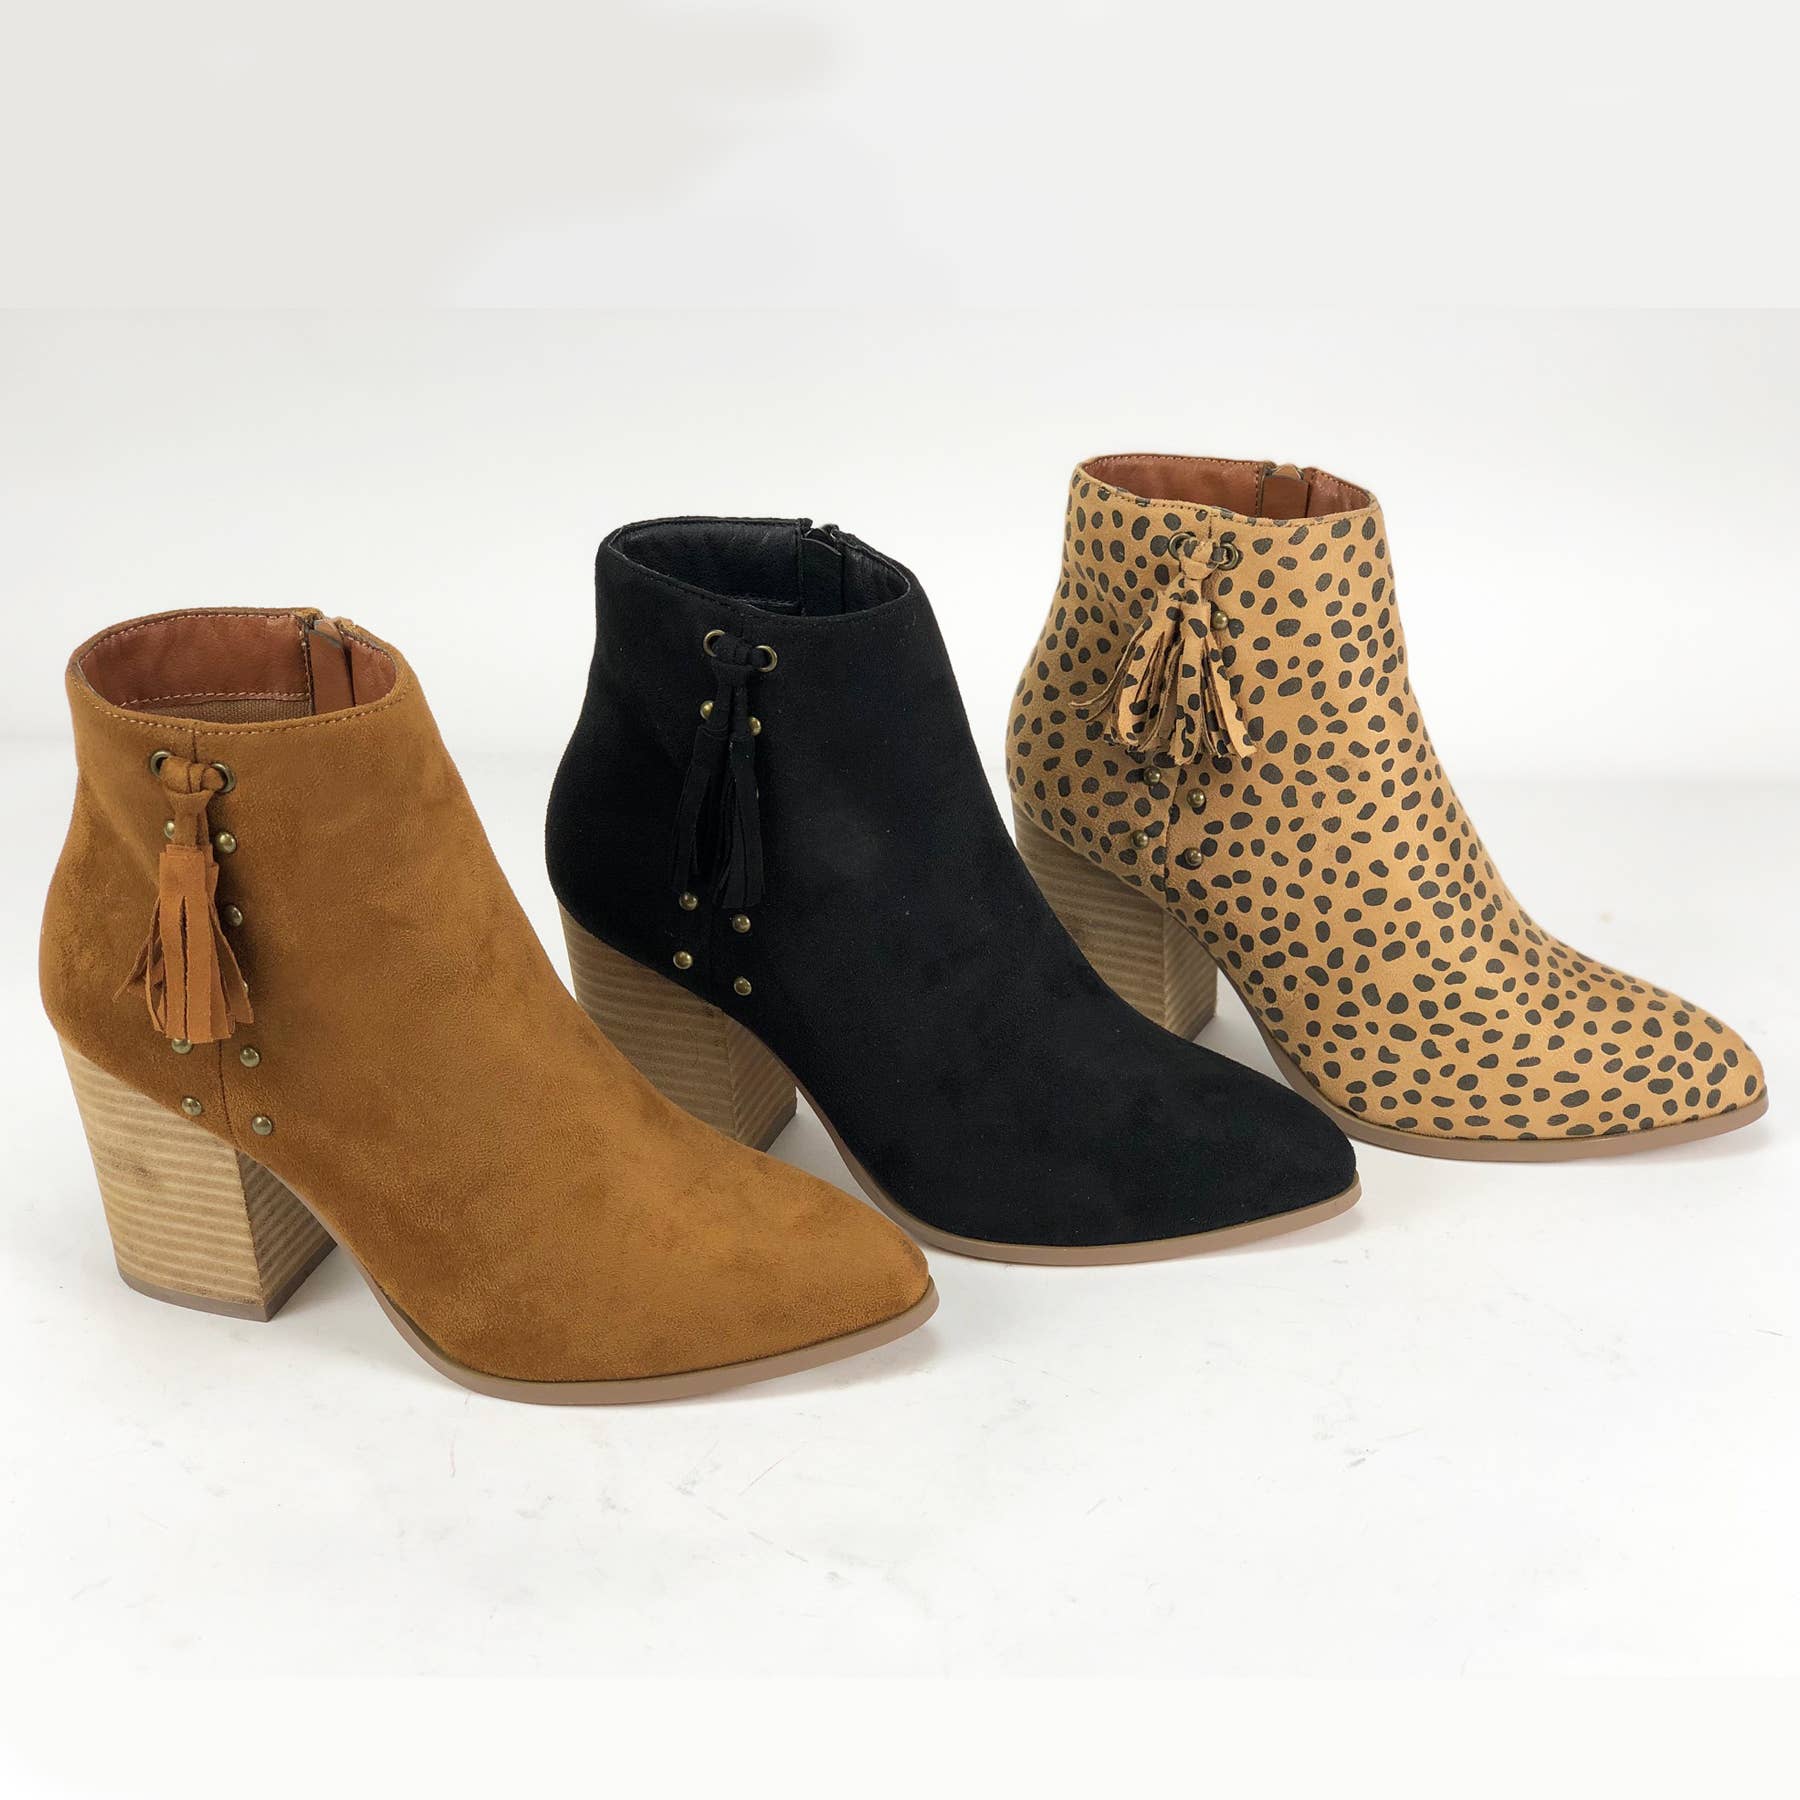 Buy Wholesale Women's Boots with Free 